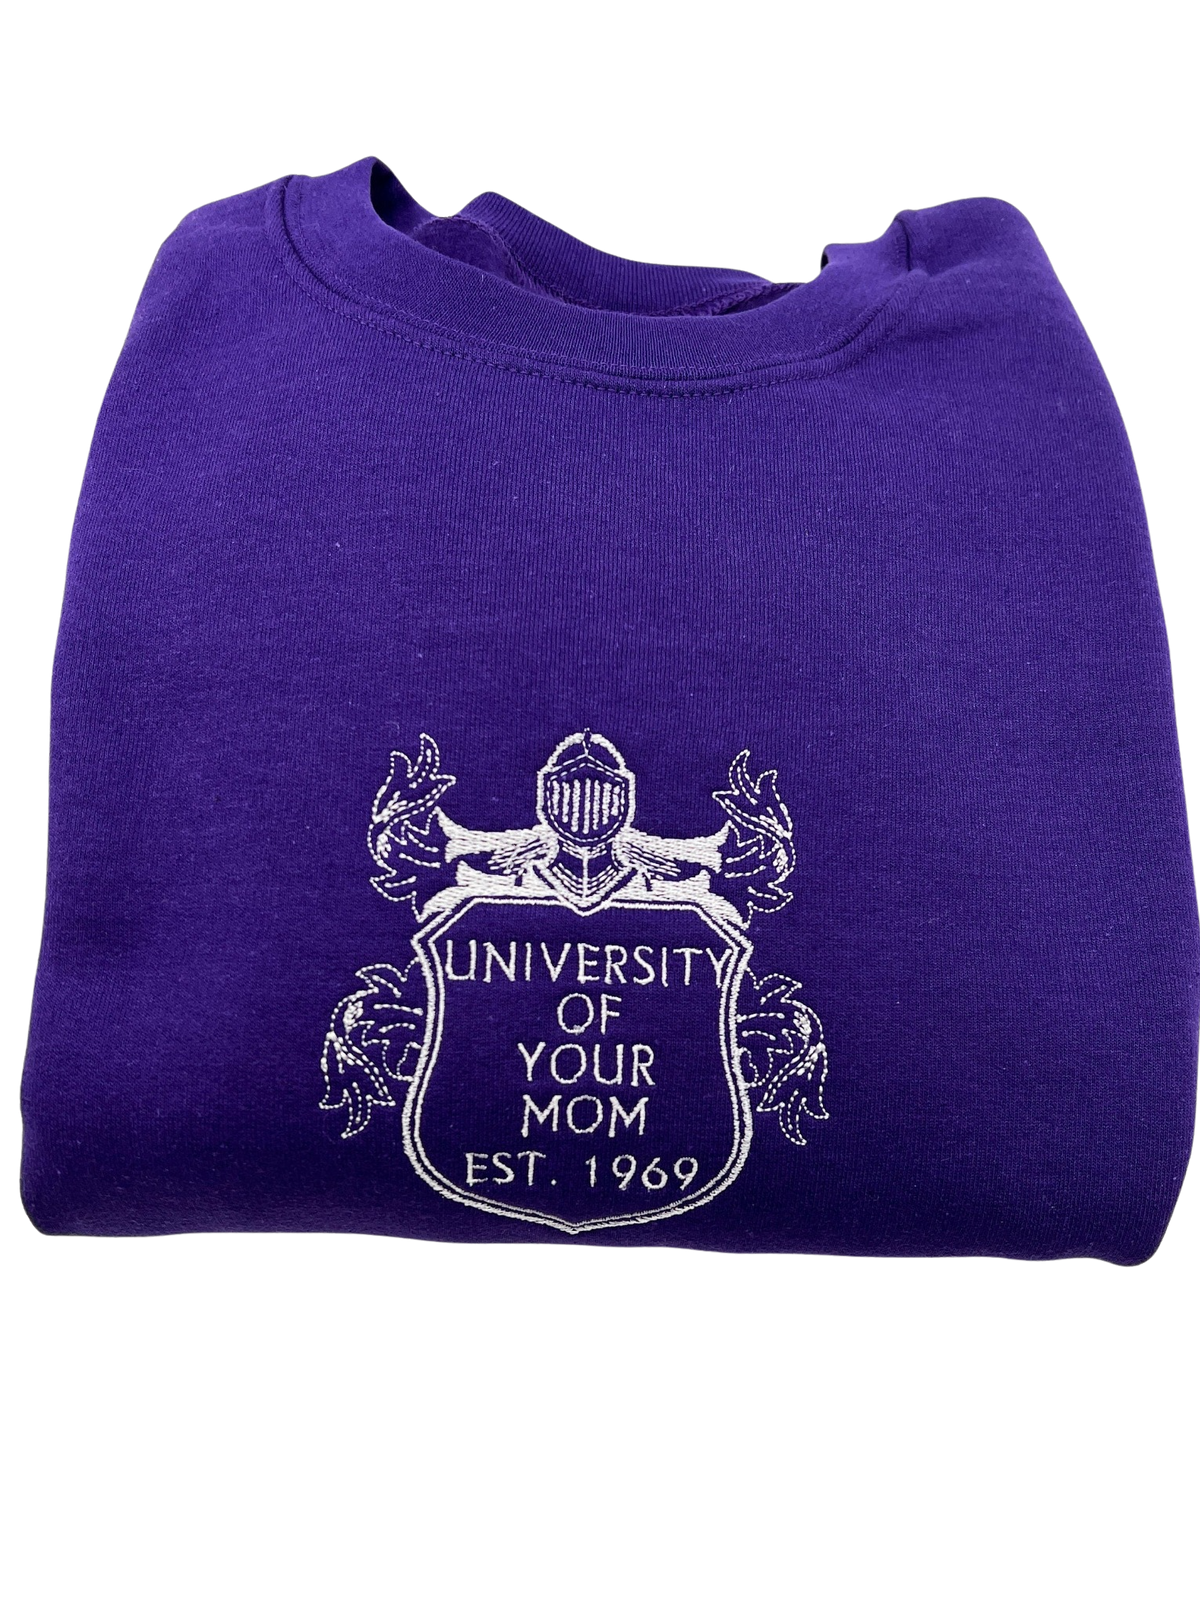 University of Your Mom Embroidered Crest Crewneck